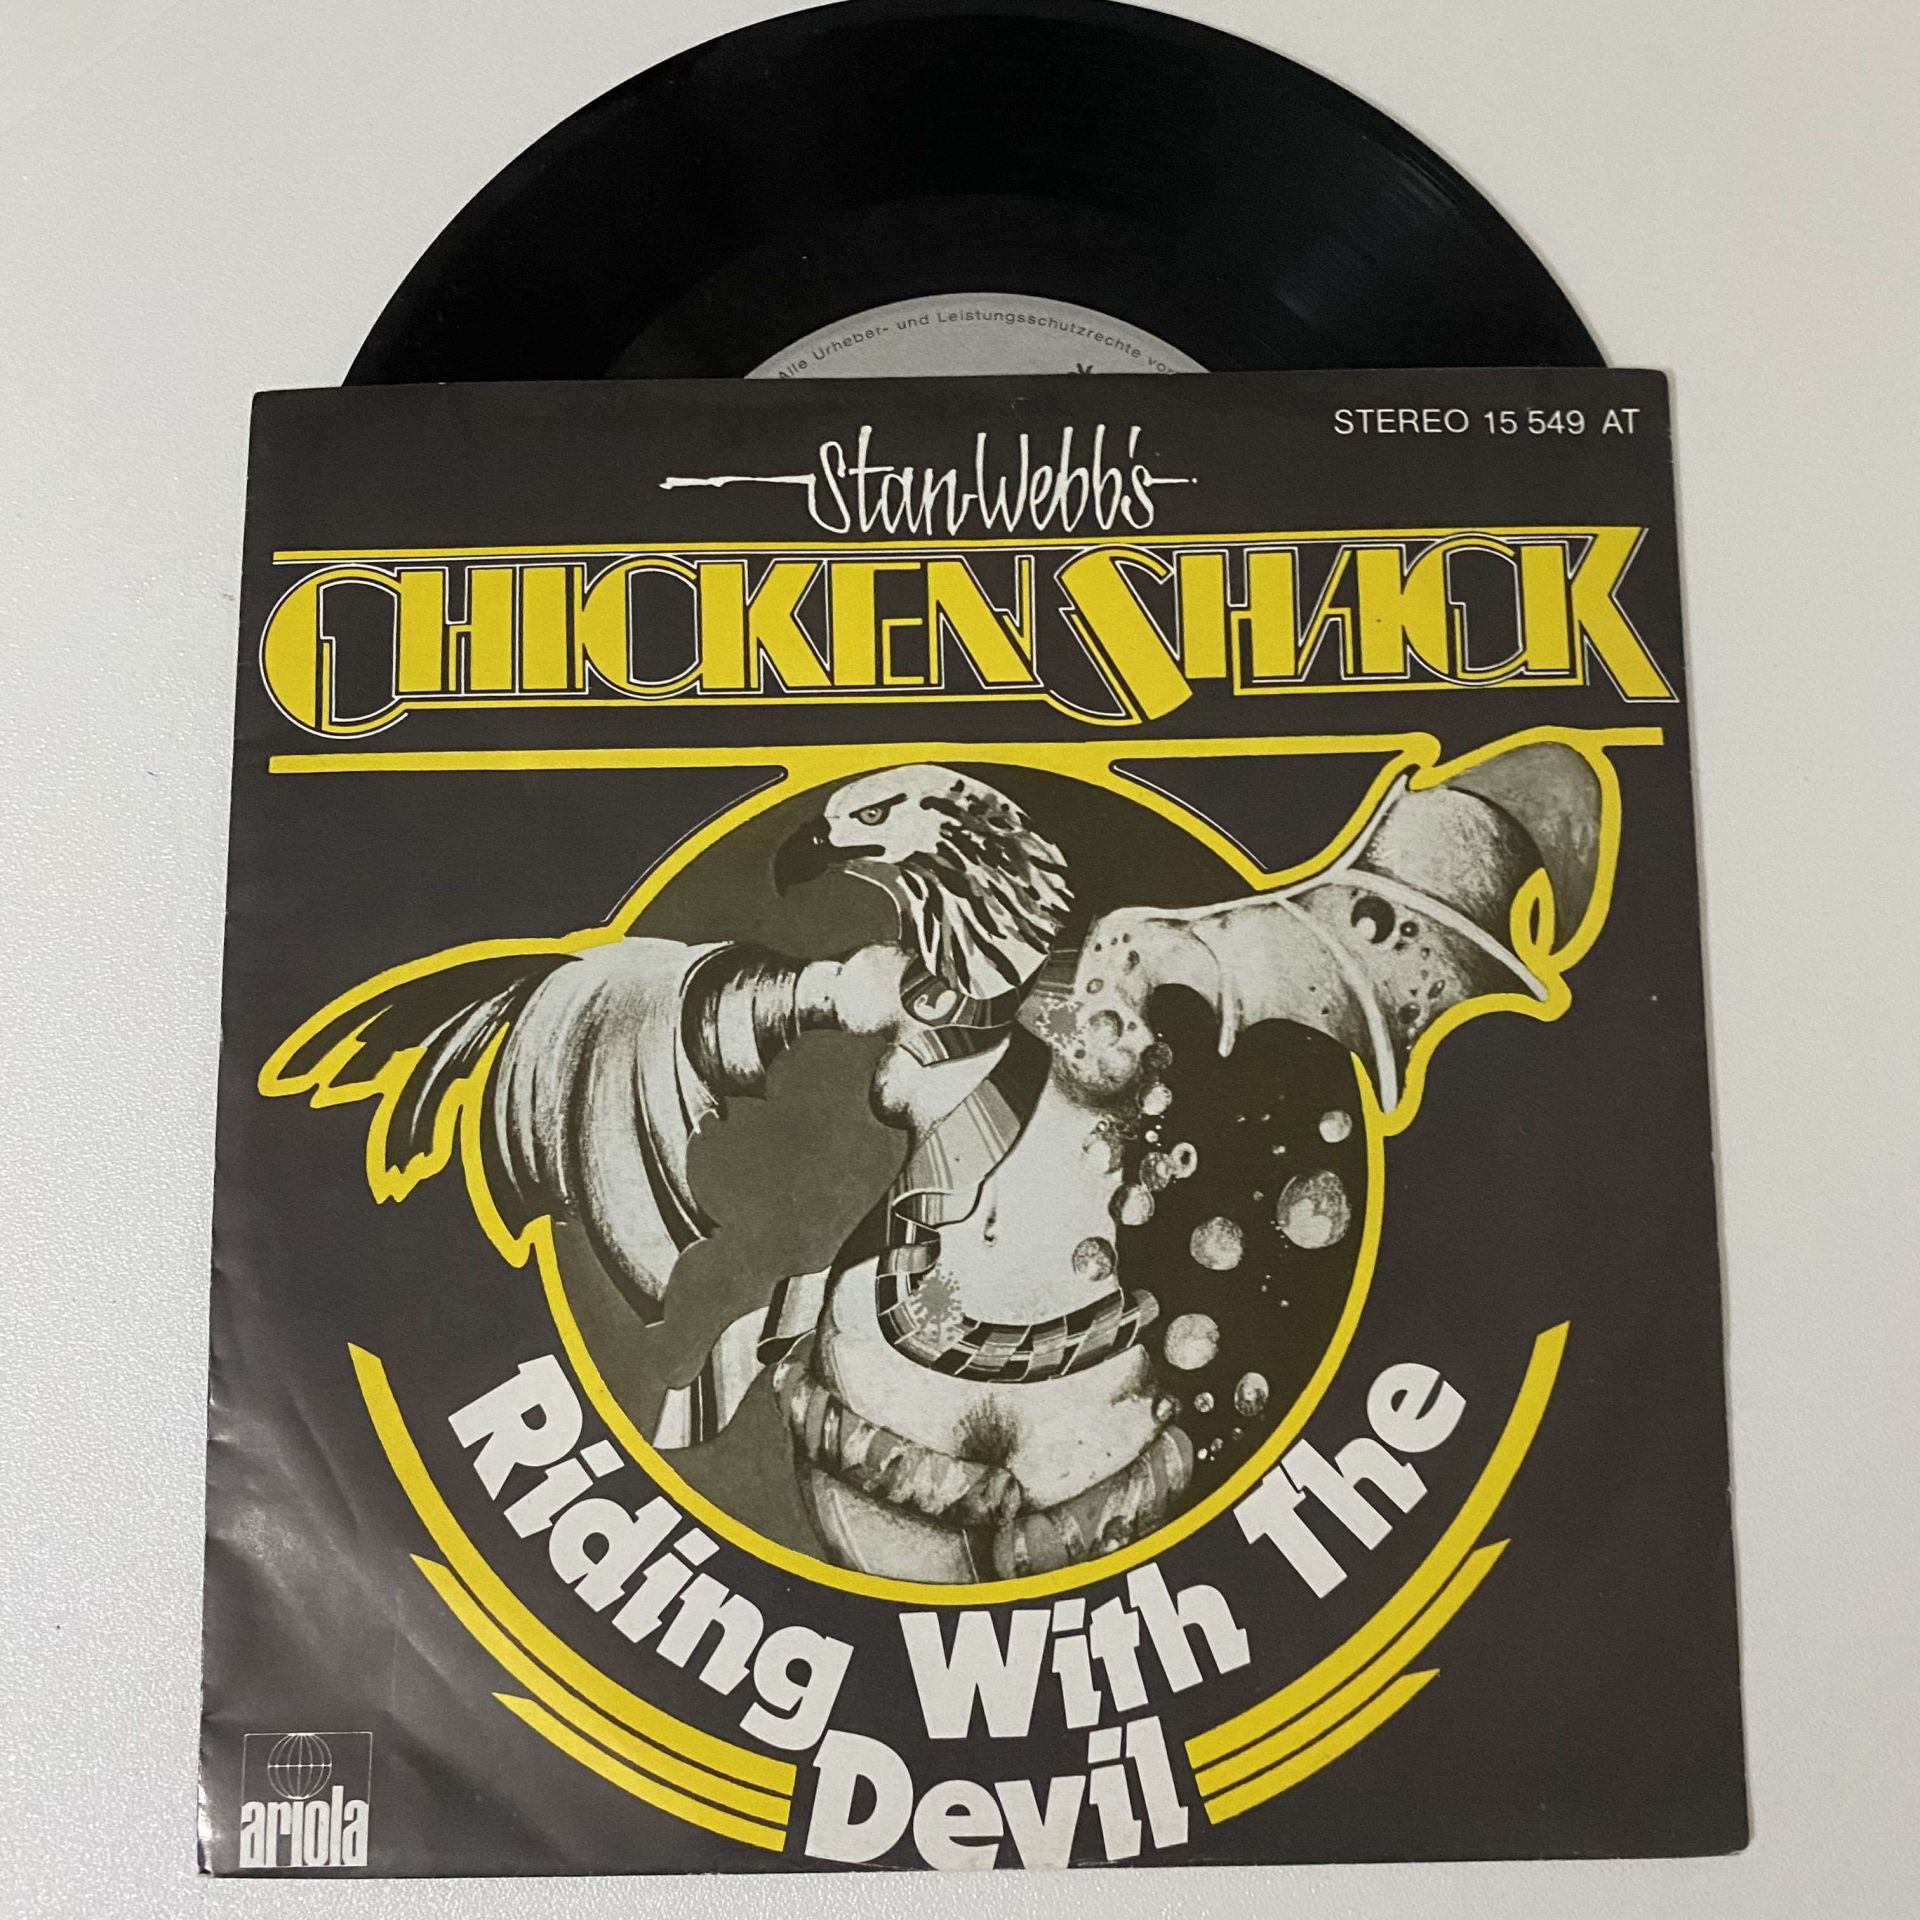 Stan Webb's Chicken Shack – Riding With The Devil